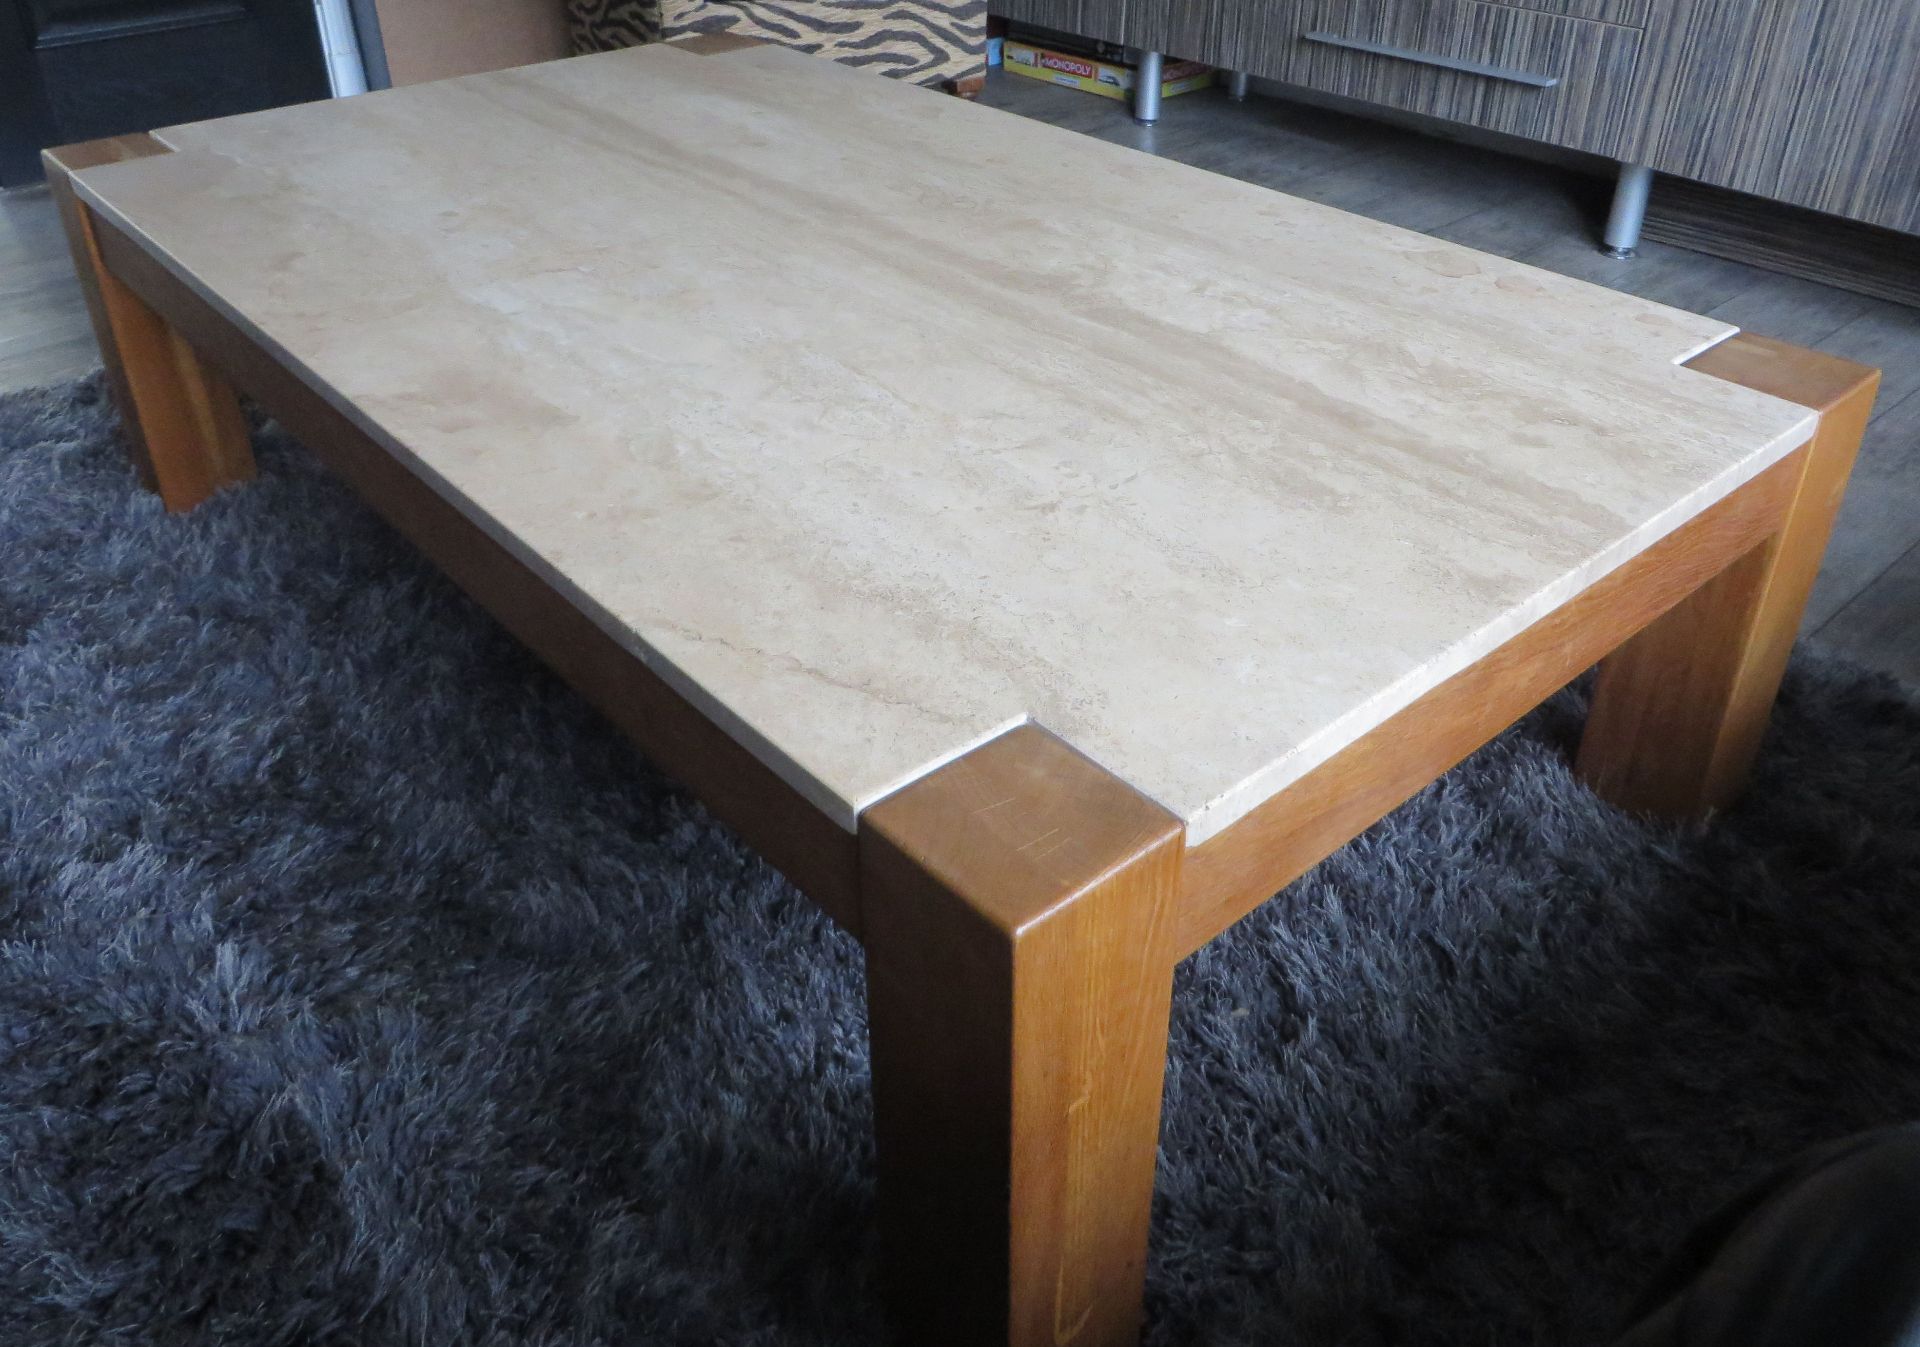 1 x Contemporary Oak and Travertine Coffee Table - CL175 - Location: Bradshaw BL2 - NO VAT - Image 2 of 9